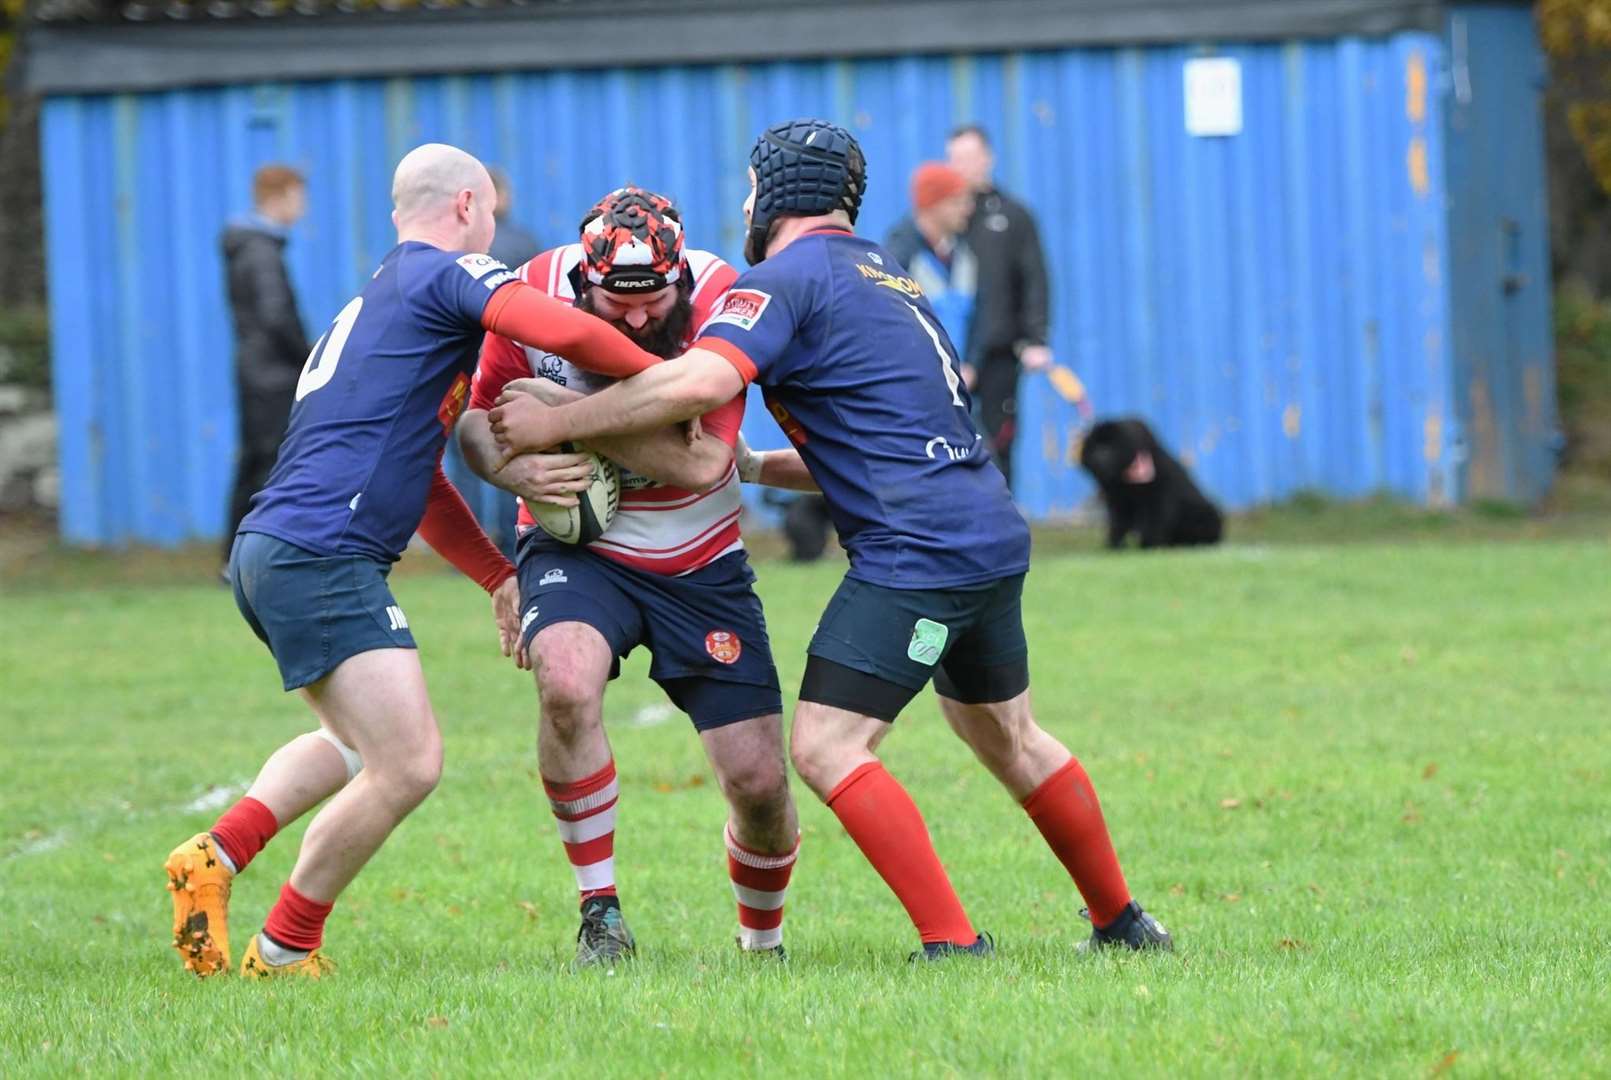 Daniel Davidson tackled by two defenders. Photo: James Officer